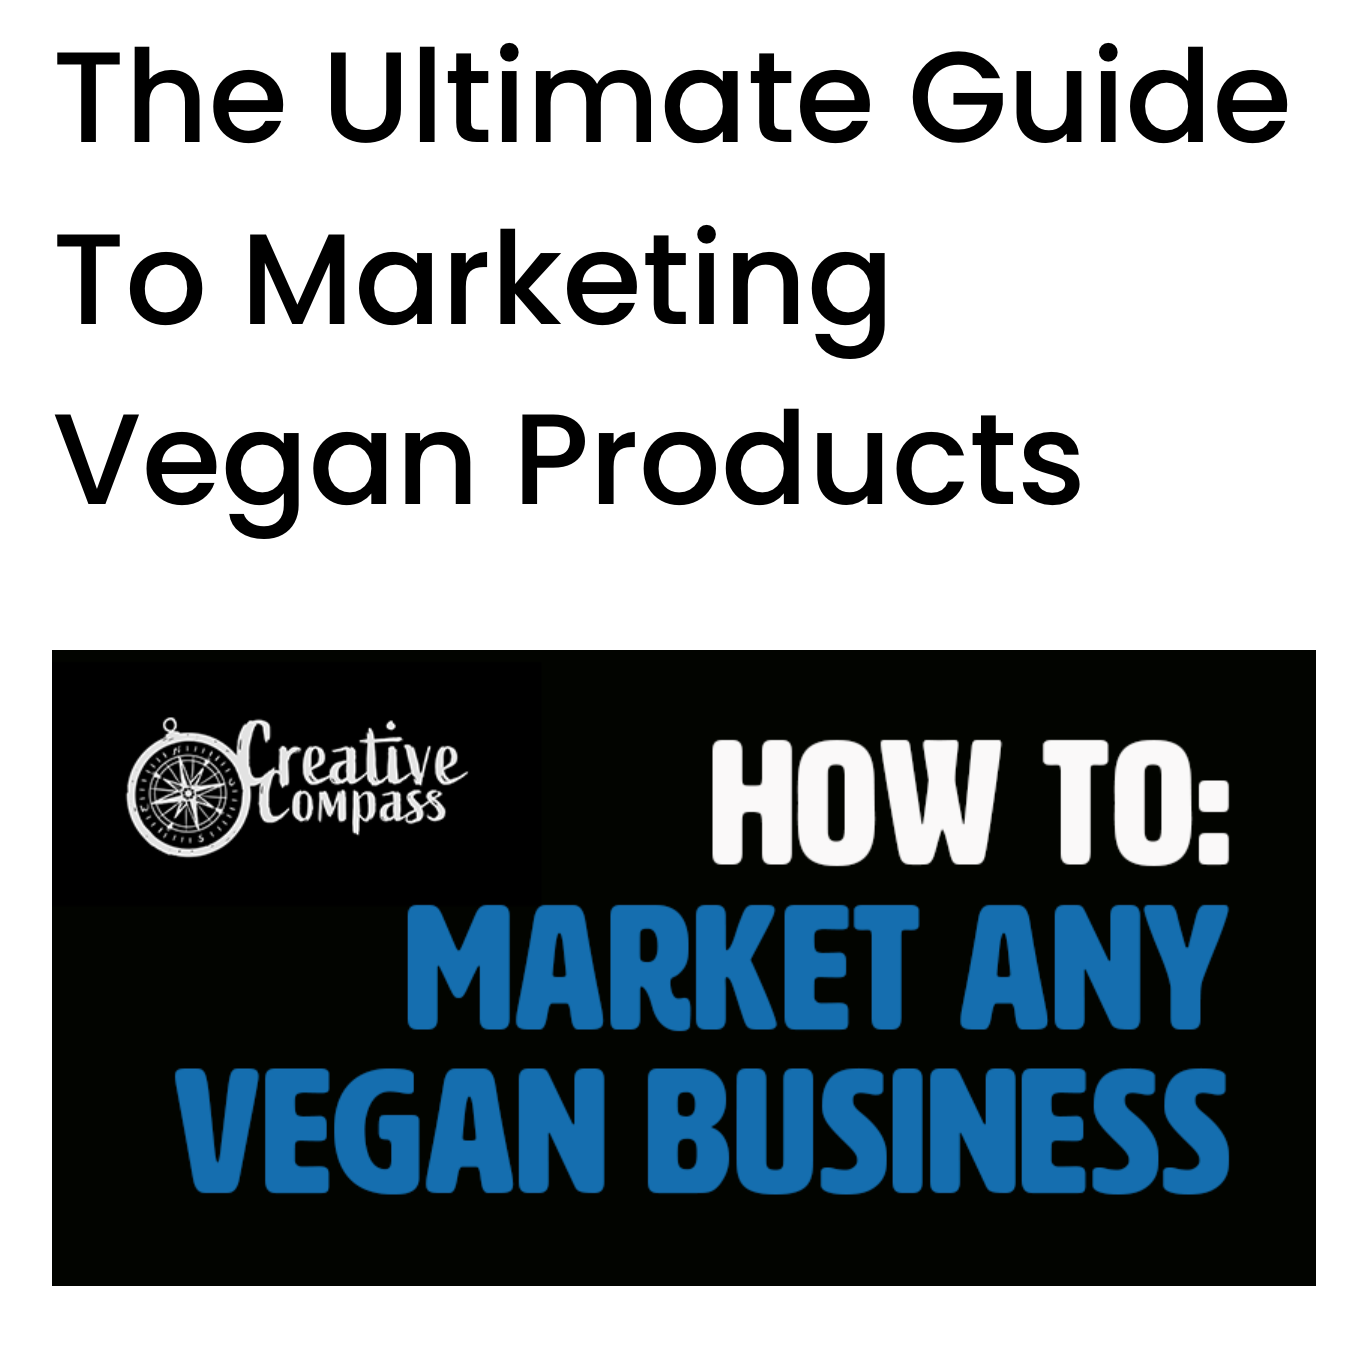 The Ultimate Guide to Marketing Vegan Products